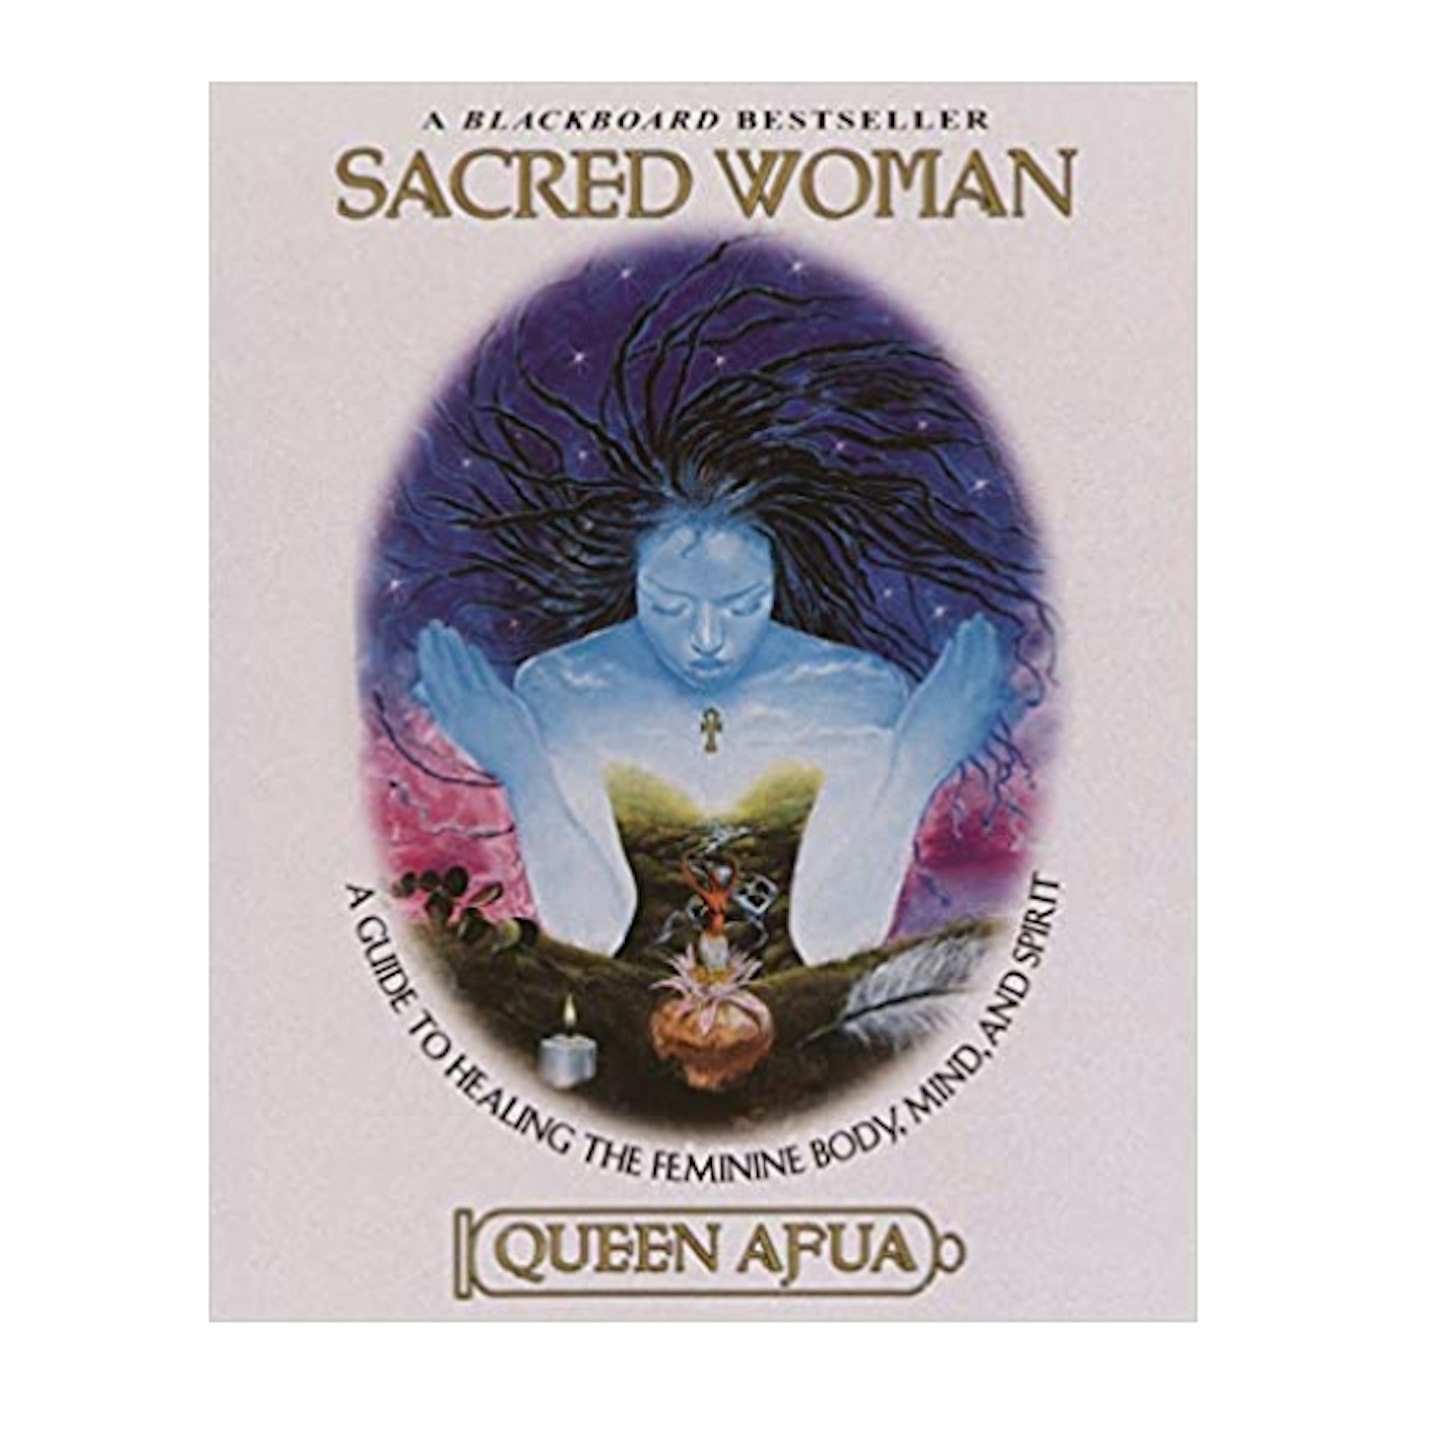 The Sacred Woman book cover